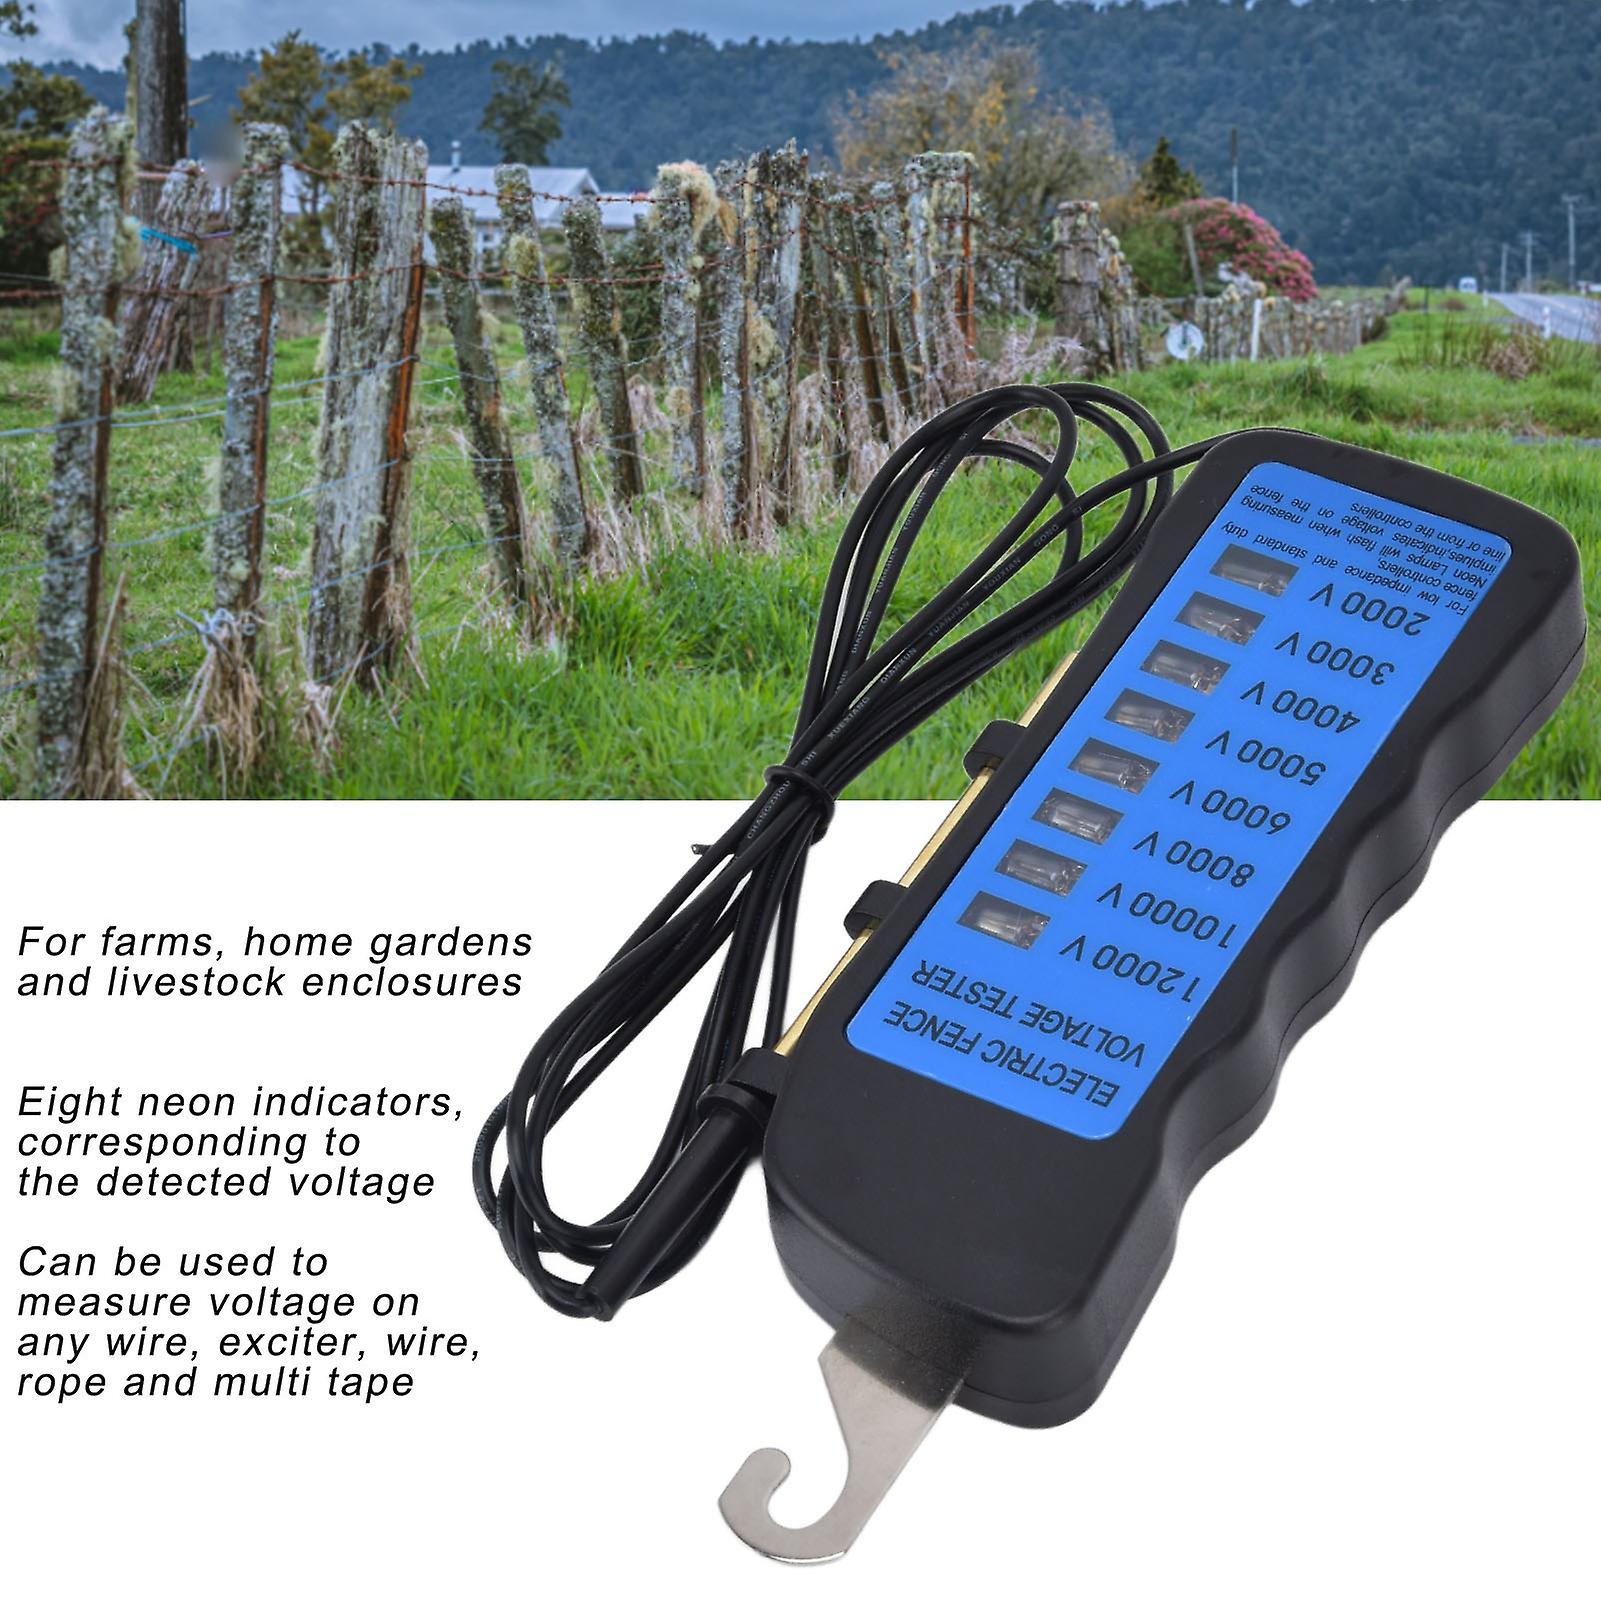 Electric Fence Voltage Tester， 12kv 8 Neon Indictors Portable Light Tester Voltmeter Fence Testing Tool For Accessories Farm Supply_x000d_